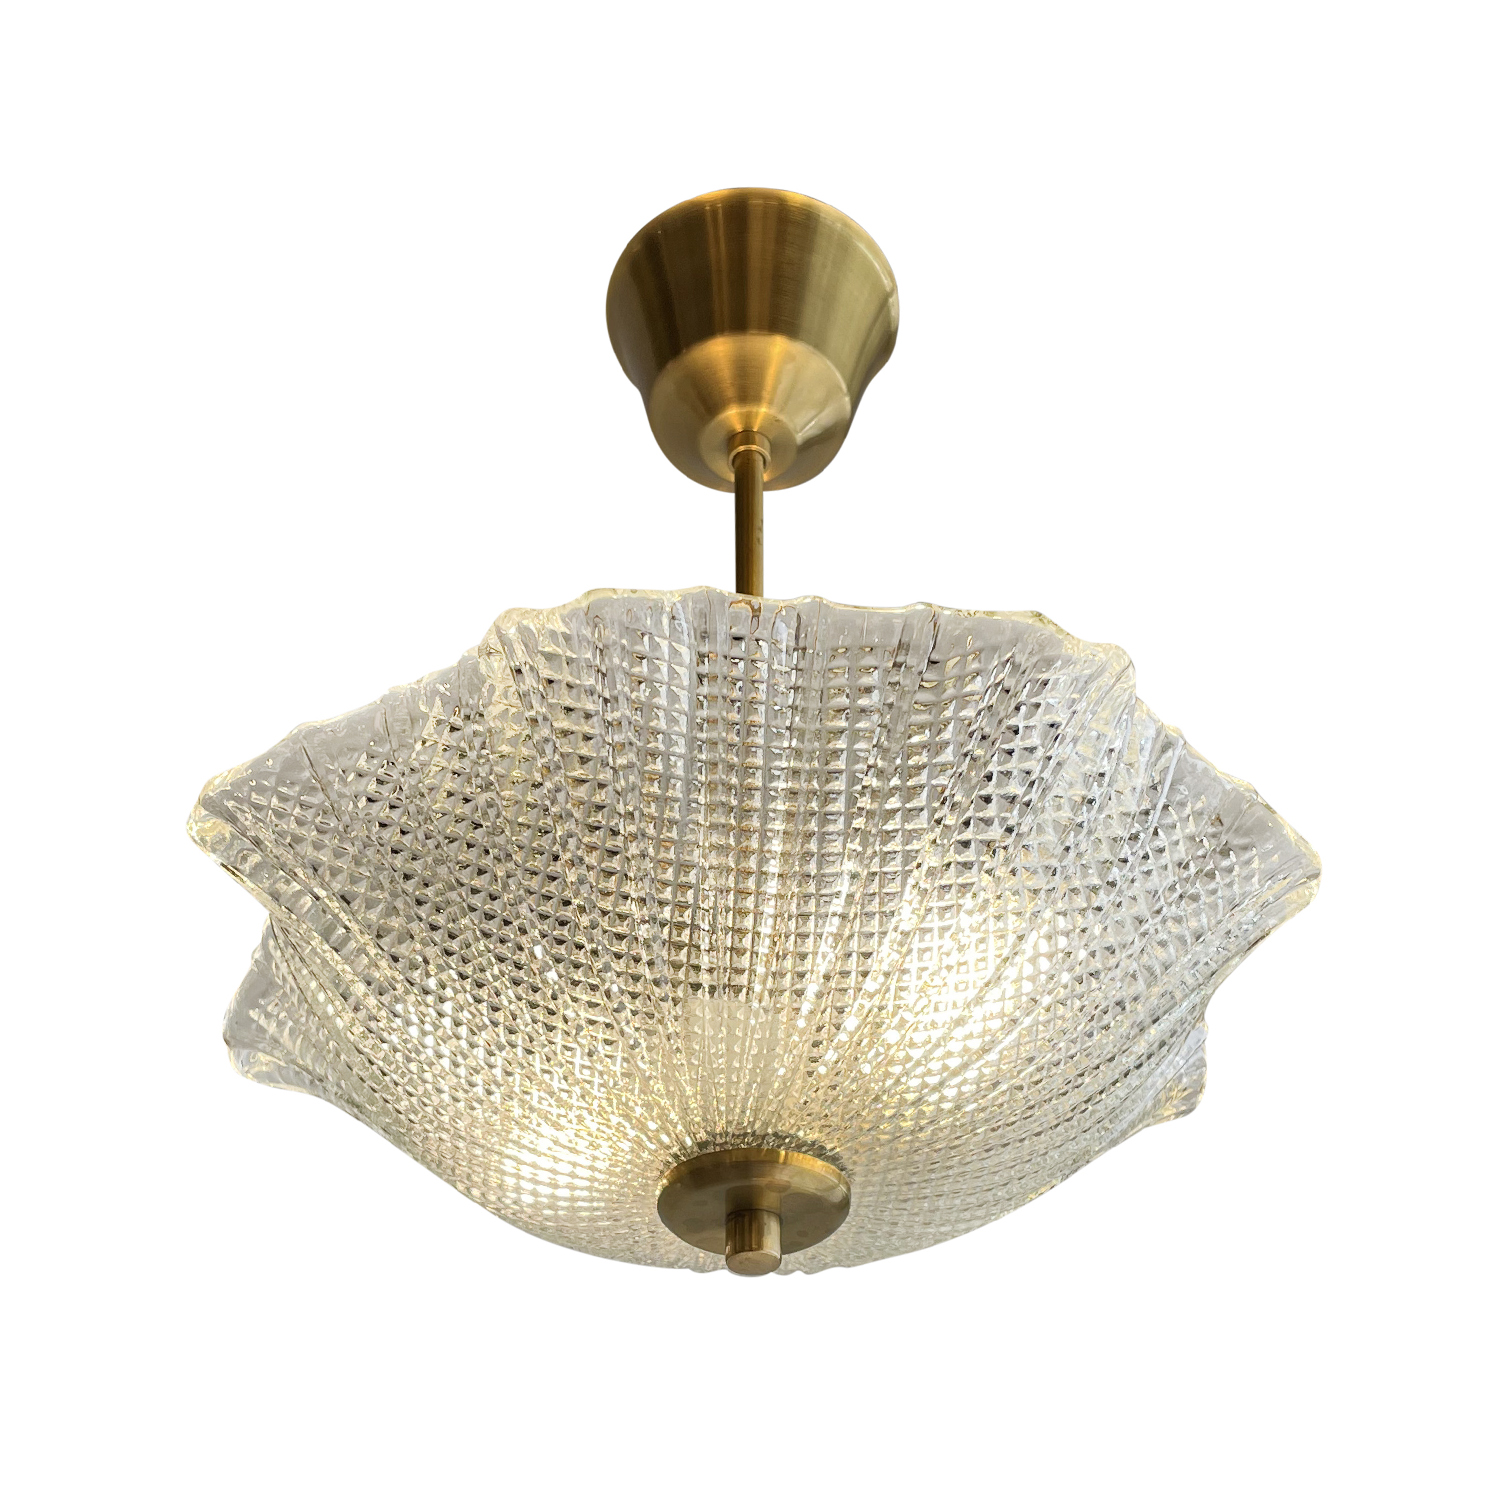 20th Century Swedish Smoked Glass Ceiling Light, Lamp Attributed to Orrefors